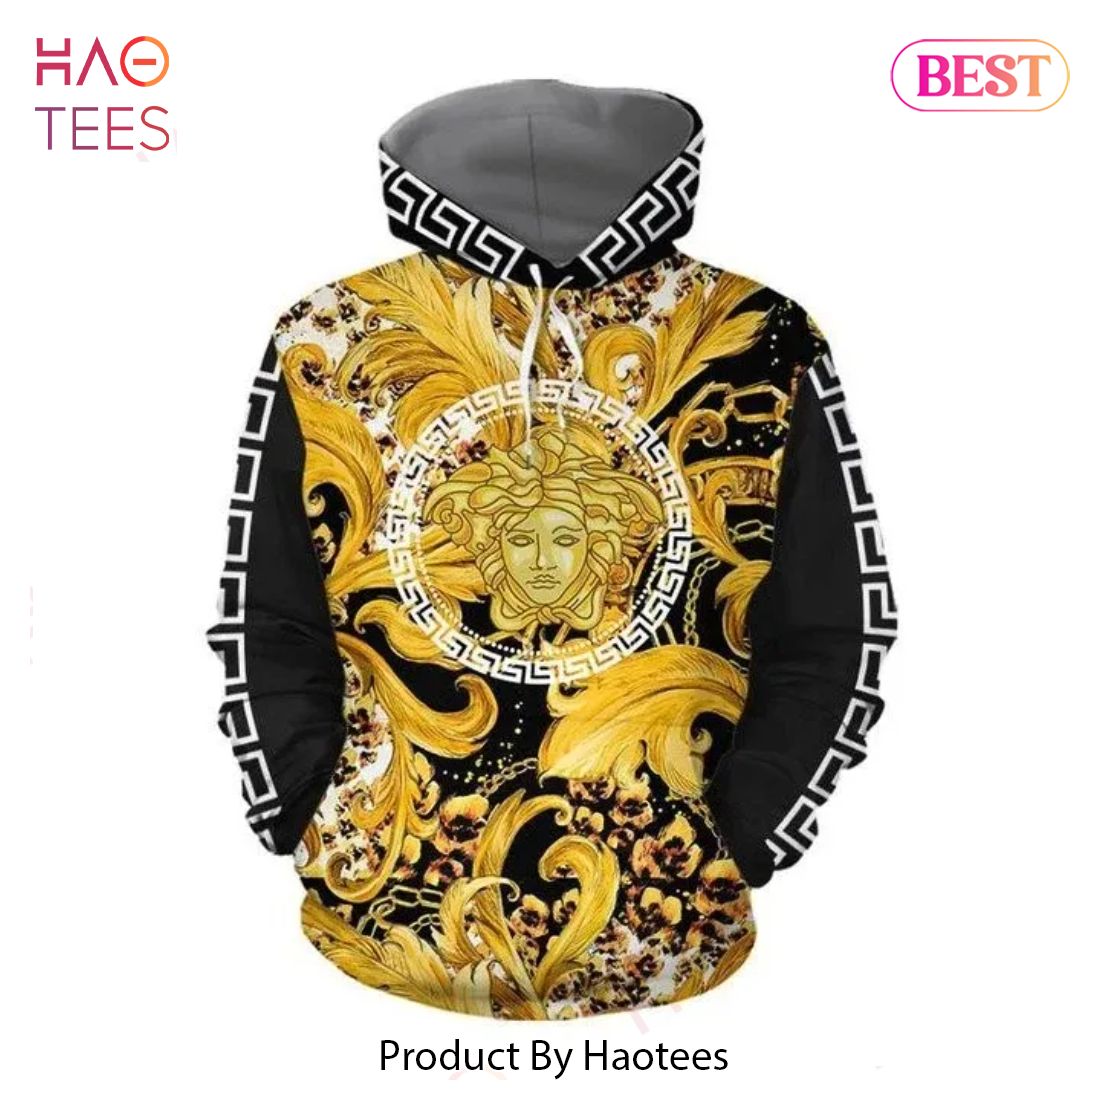 BEST FASHION] Gianni Versace Black Gold Unisex Hoodie For Men Women Luxury  Brand Clothing Clothes Outfit